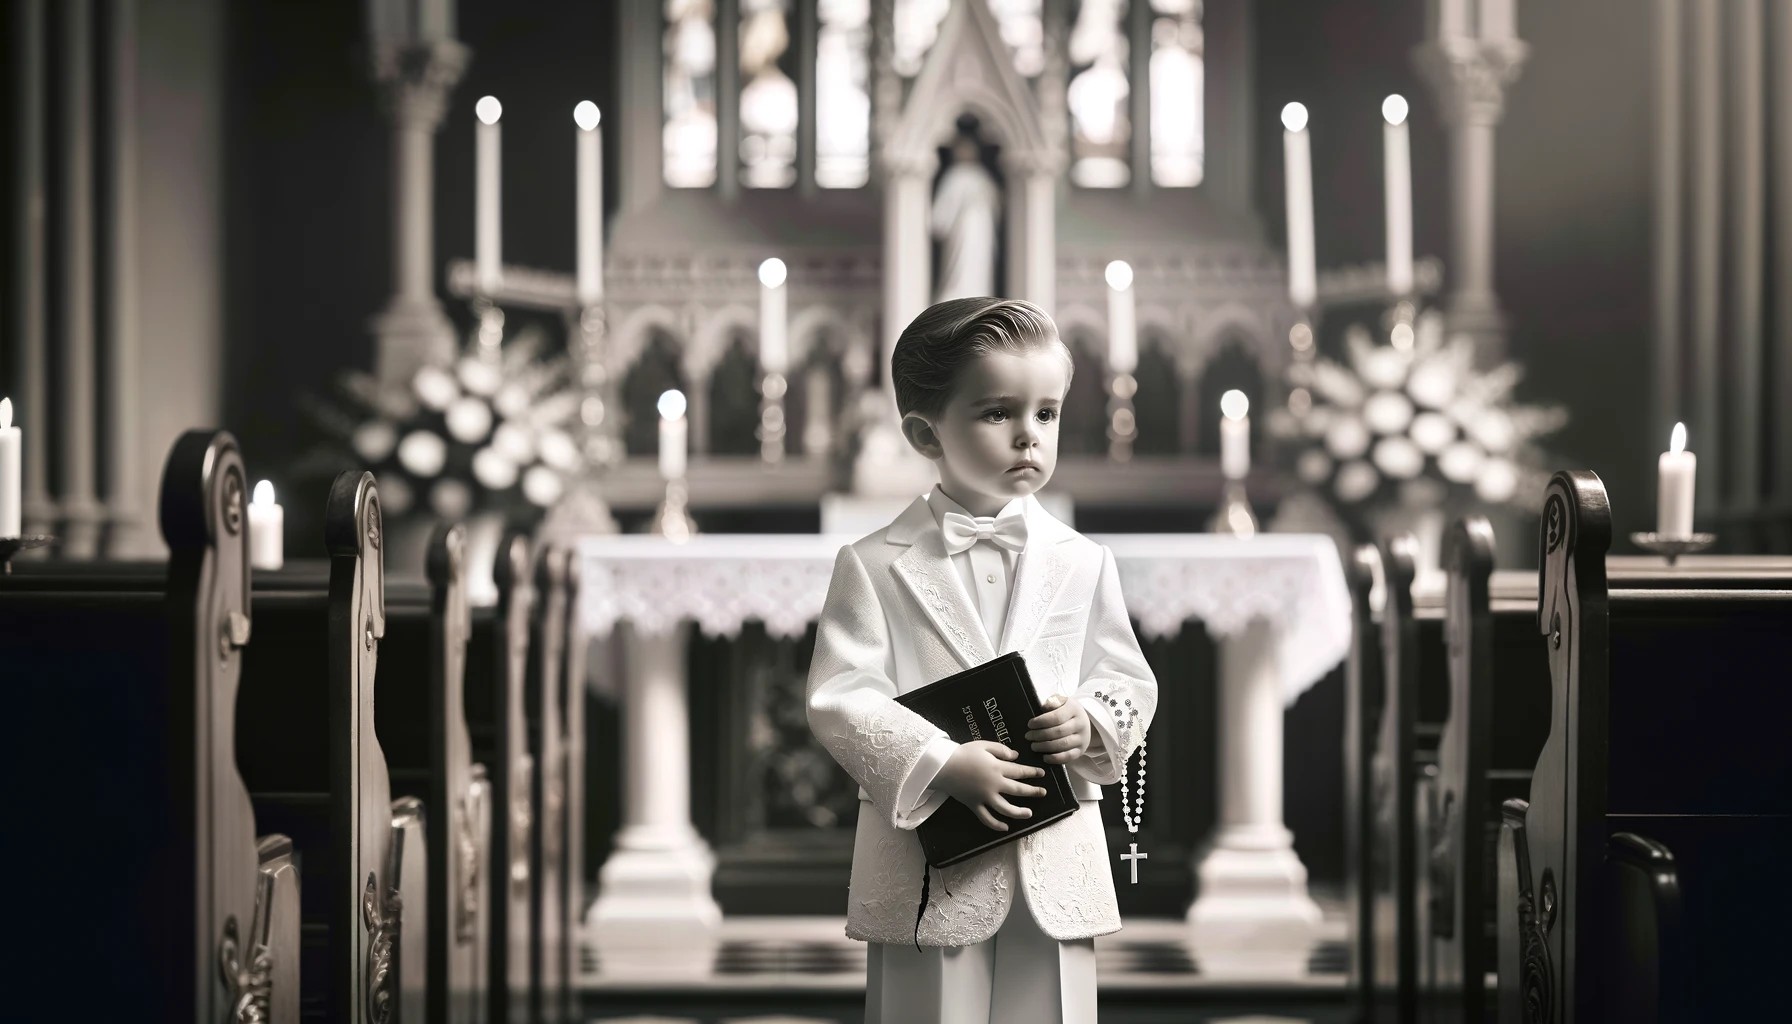 What Do You Need For Your First Communion